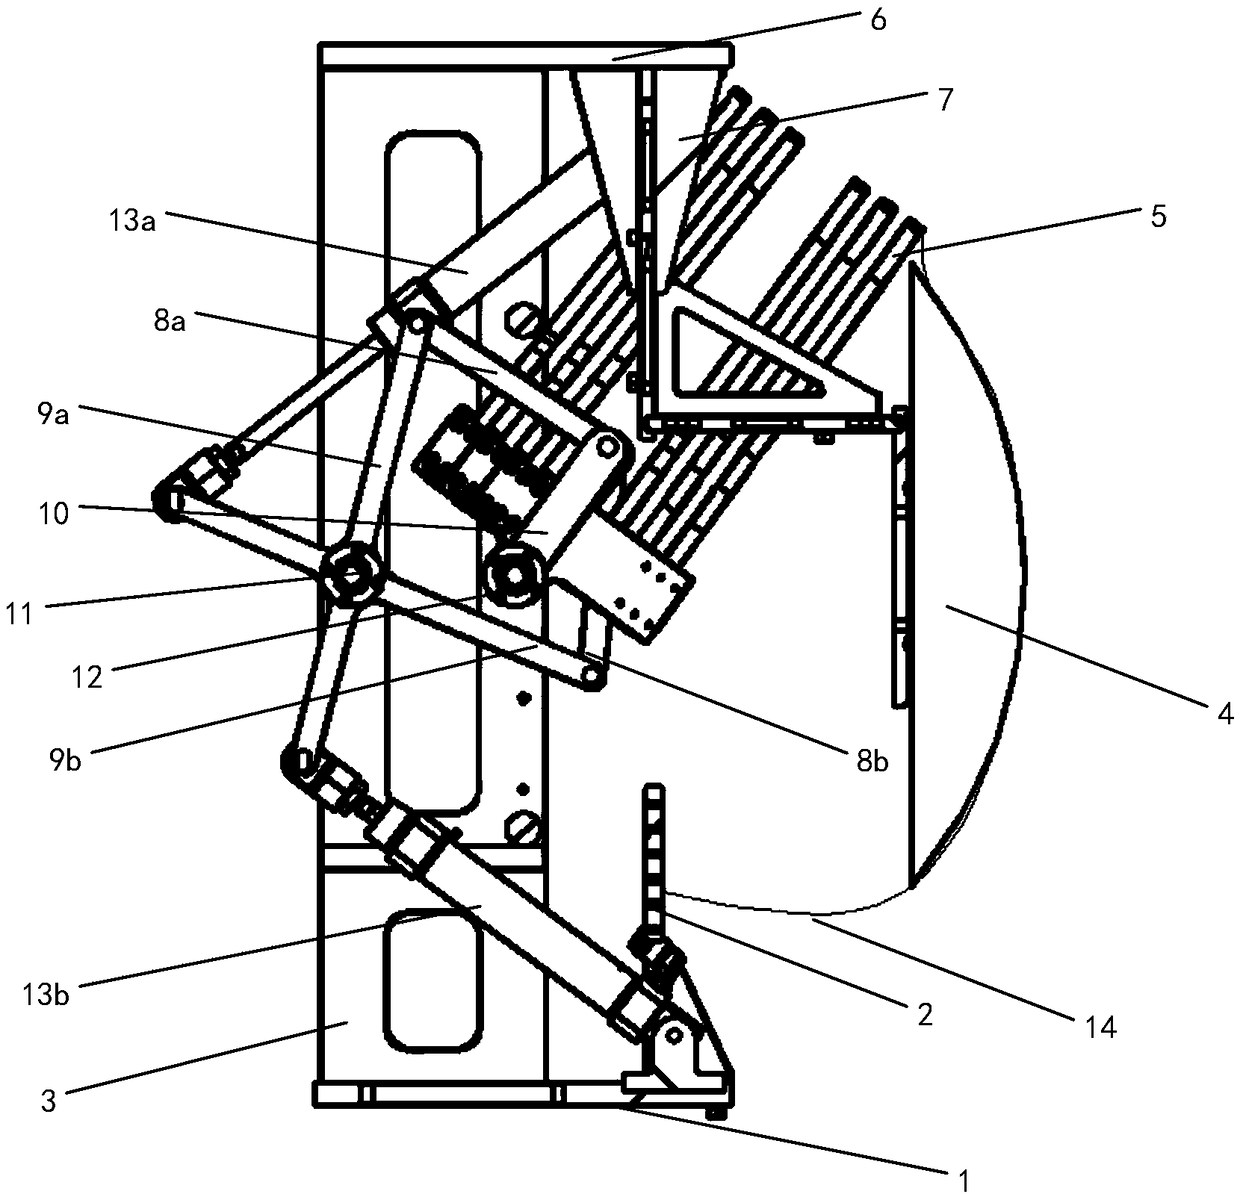 Multi-shaft rotating face changing mechanism